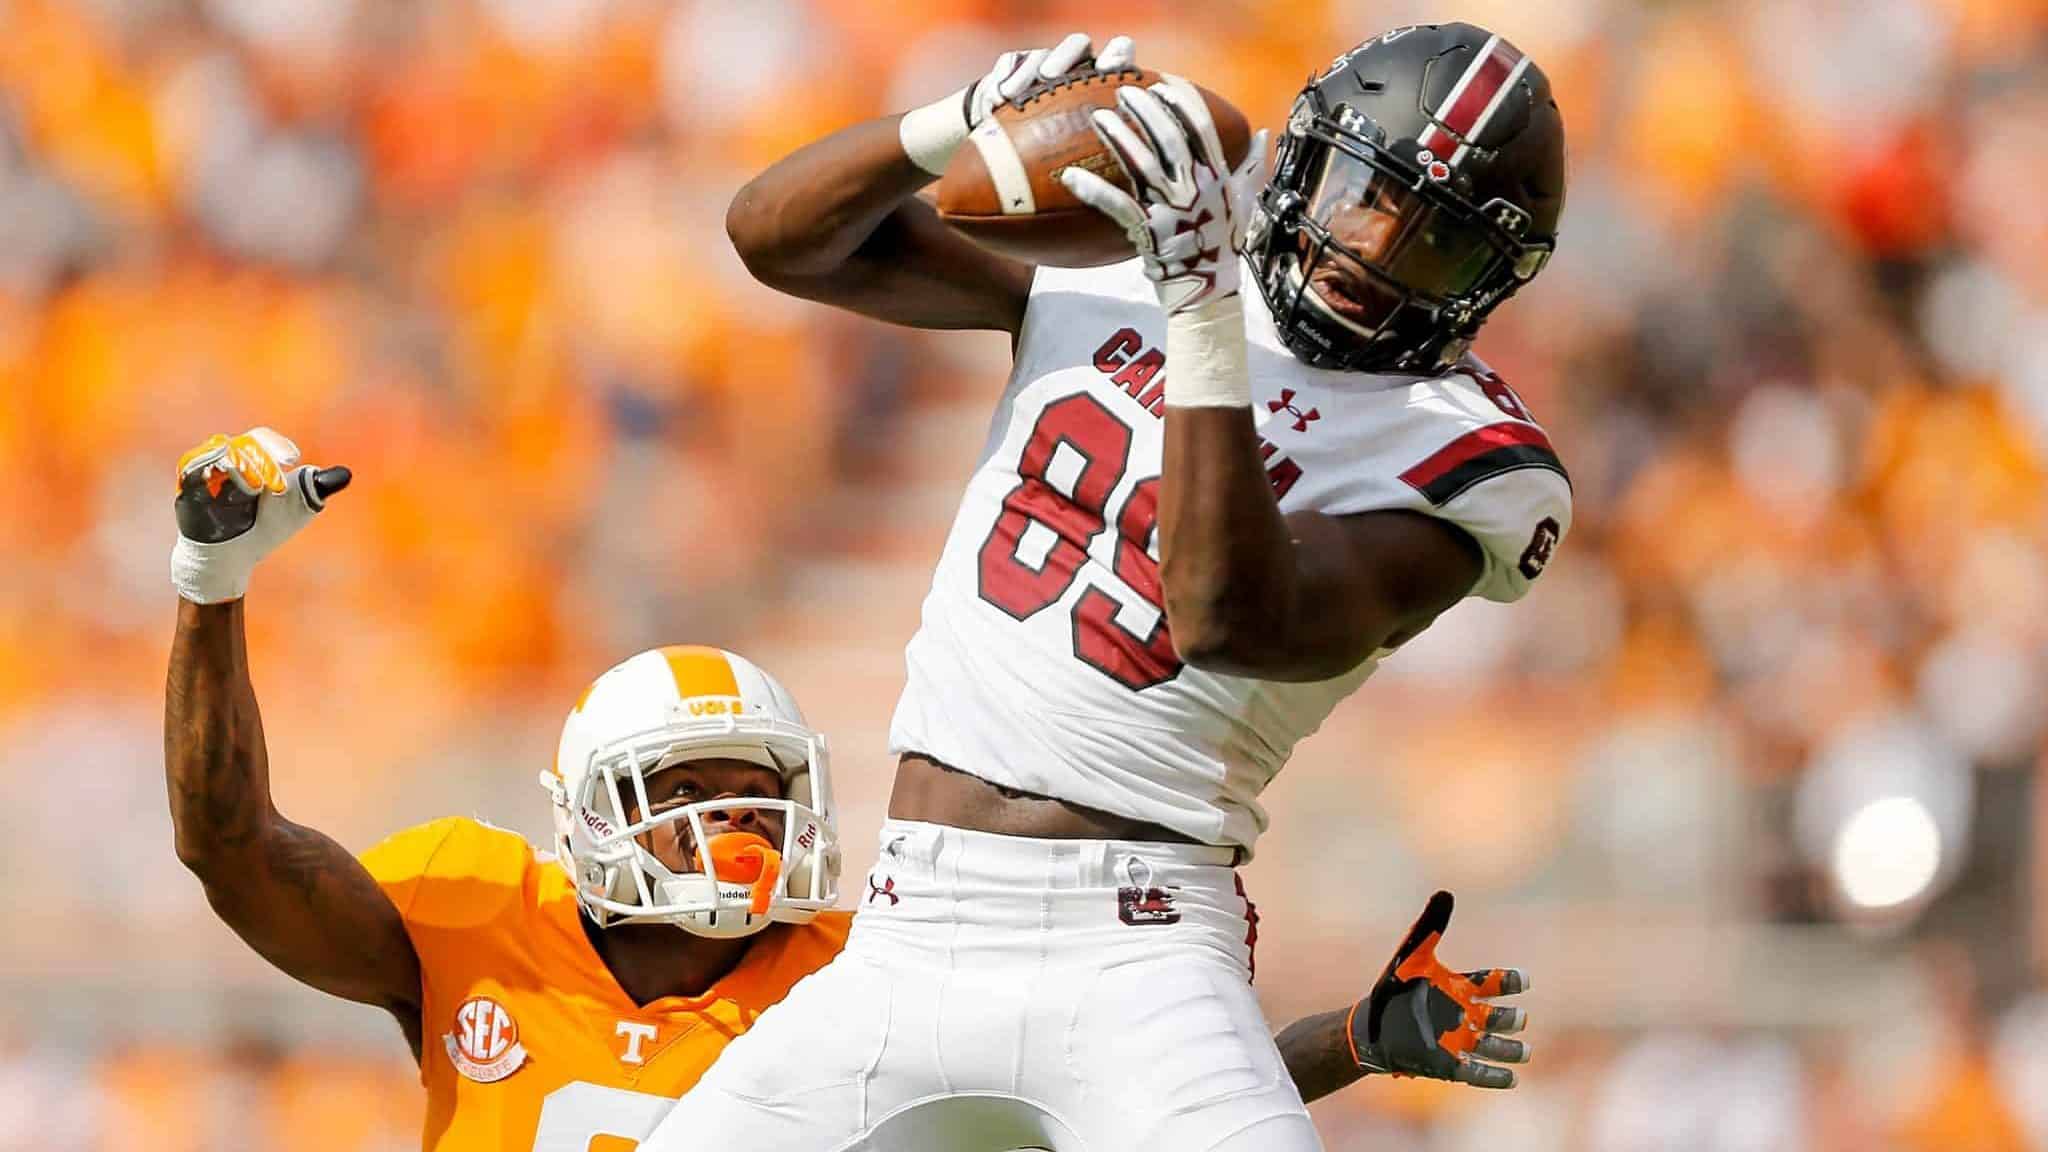 KNOXVILLE, TN - OCTOBER 14: Bryan Edwards #89 of the South Carolina Gamecocks makes a catch defended by Shaq Wiggins #6 of the Tennessee Volunteers during the first half at Neyland Stadium on October 14, 2017 in Knoxville, Tennessee.